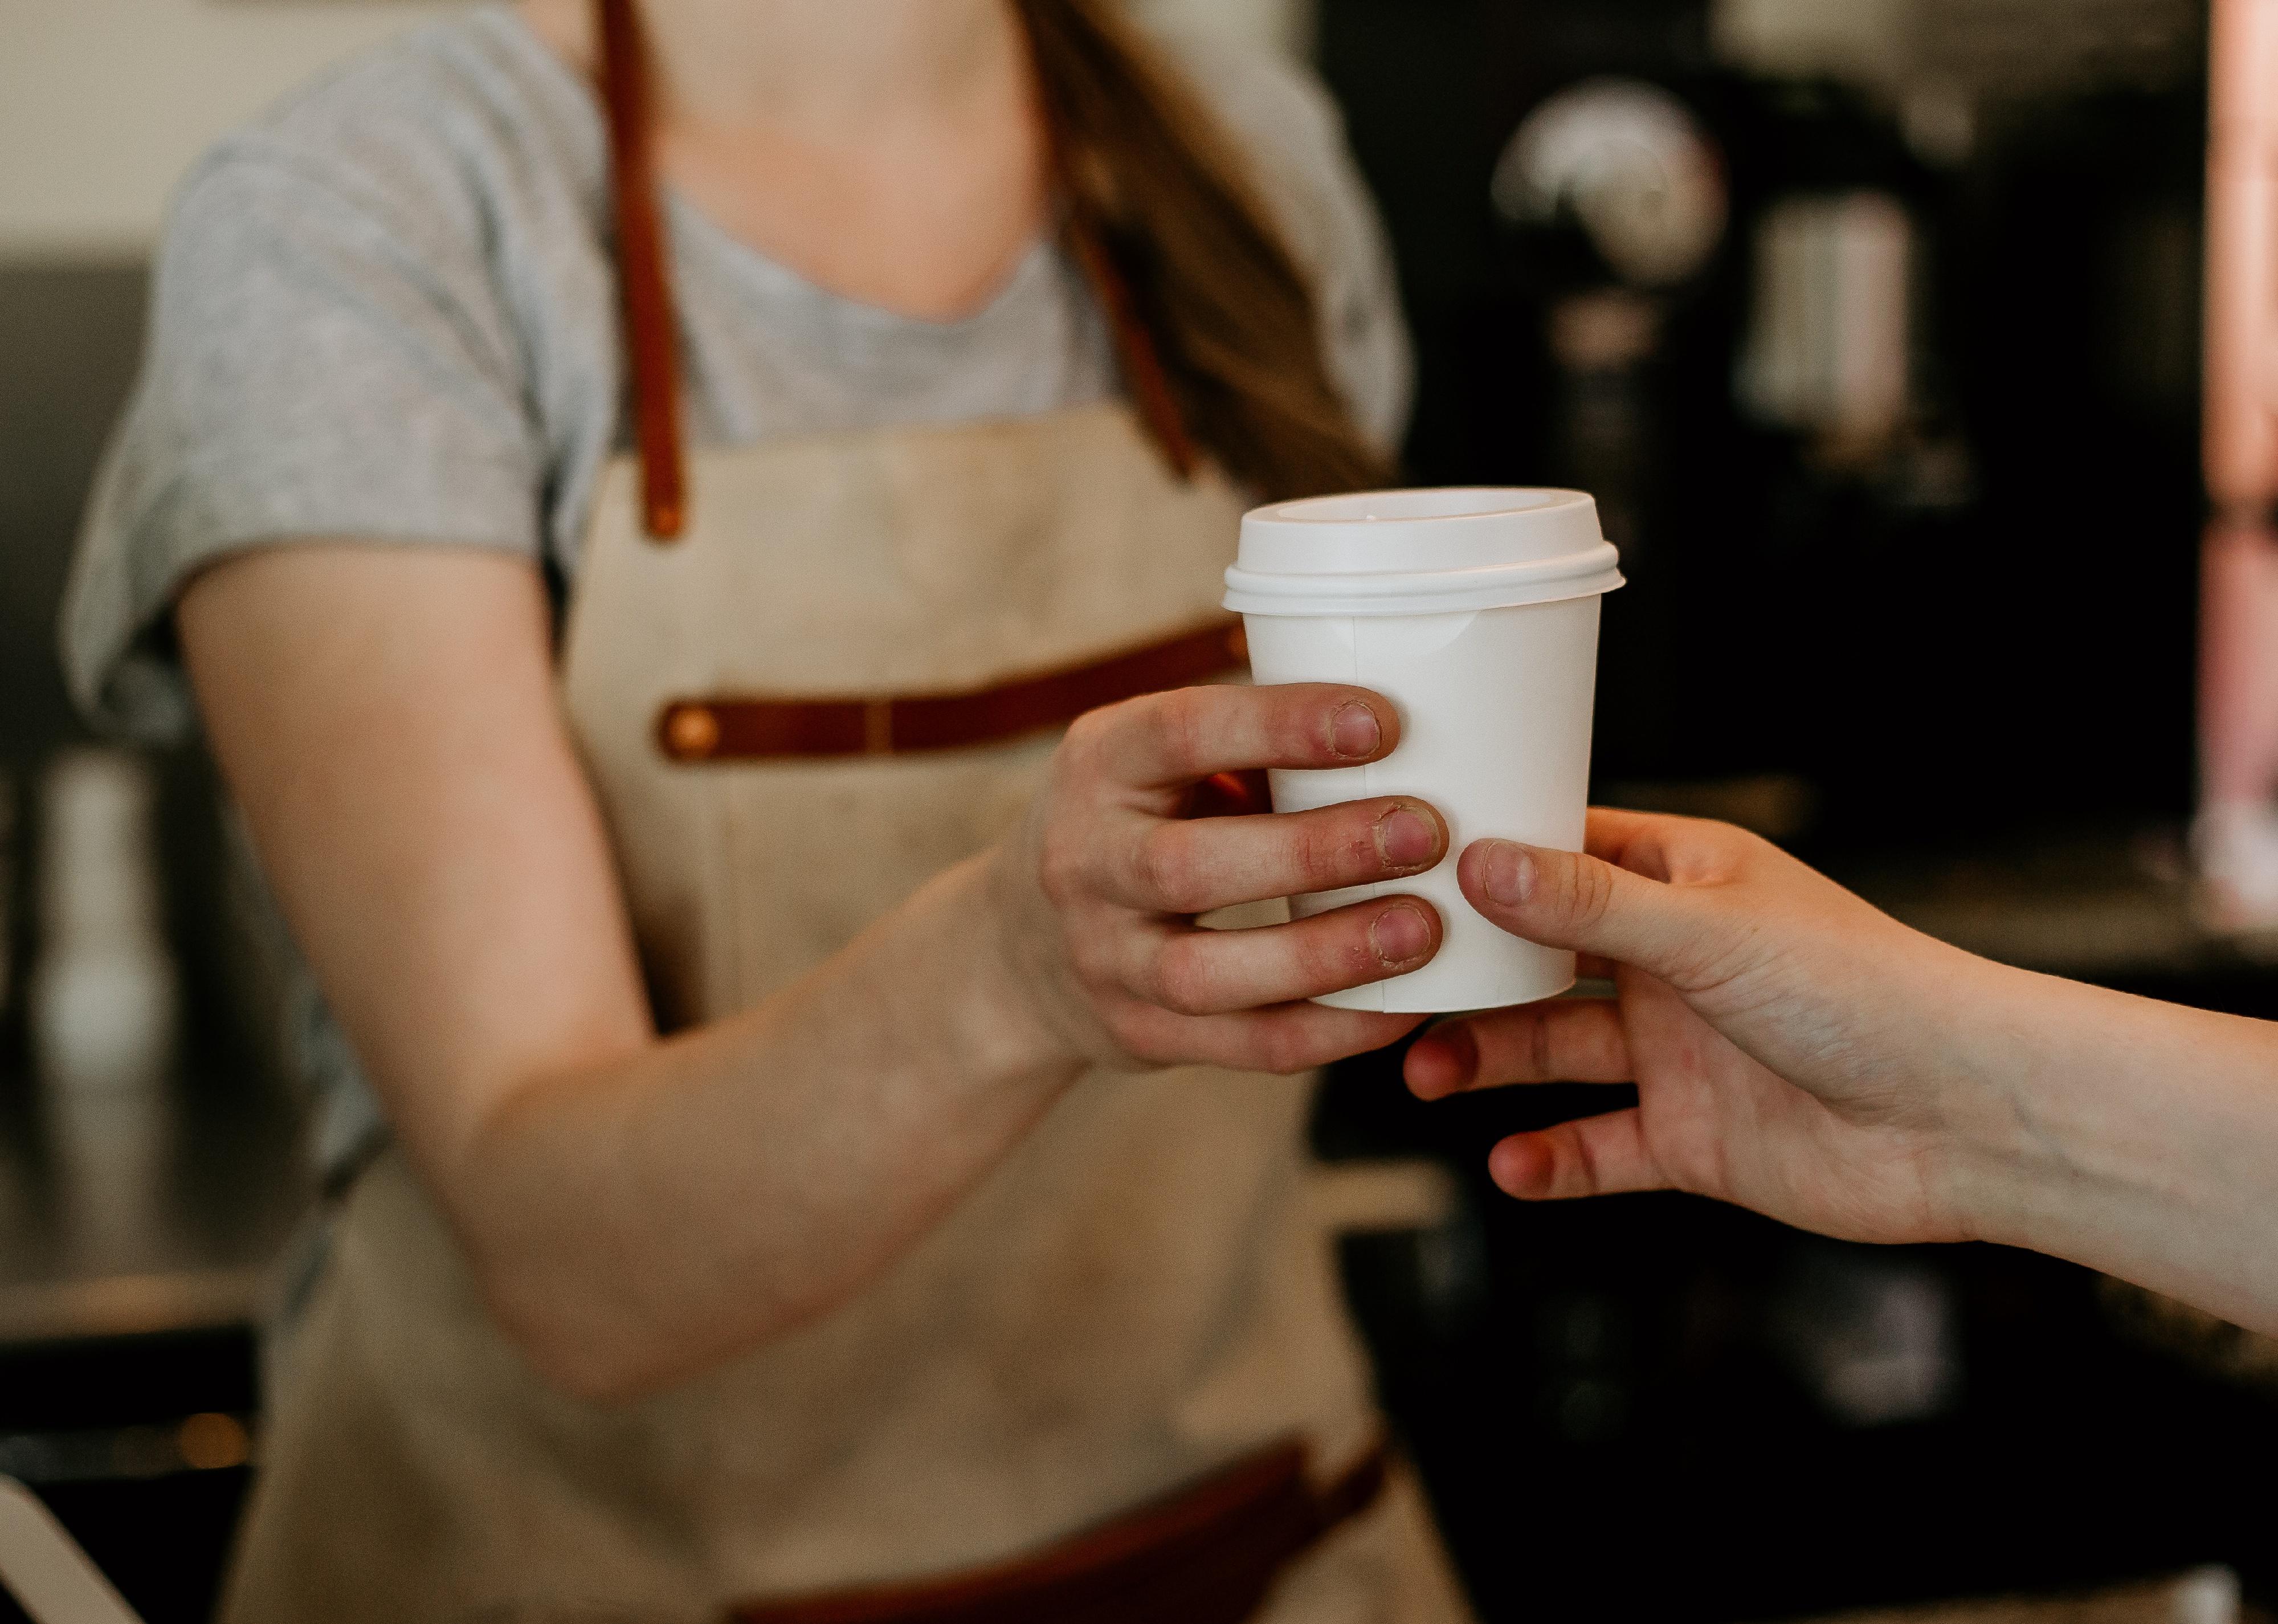 A barista handing a customer a cup of to go coffee.